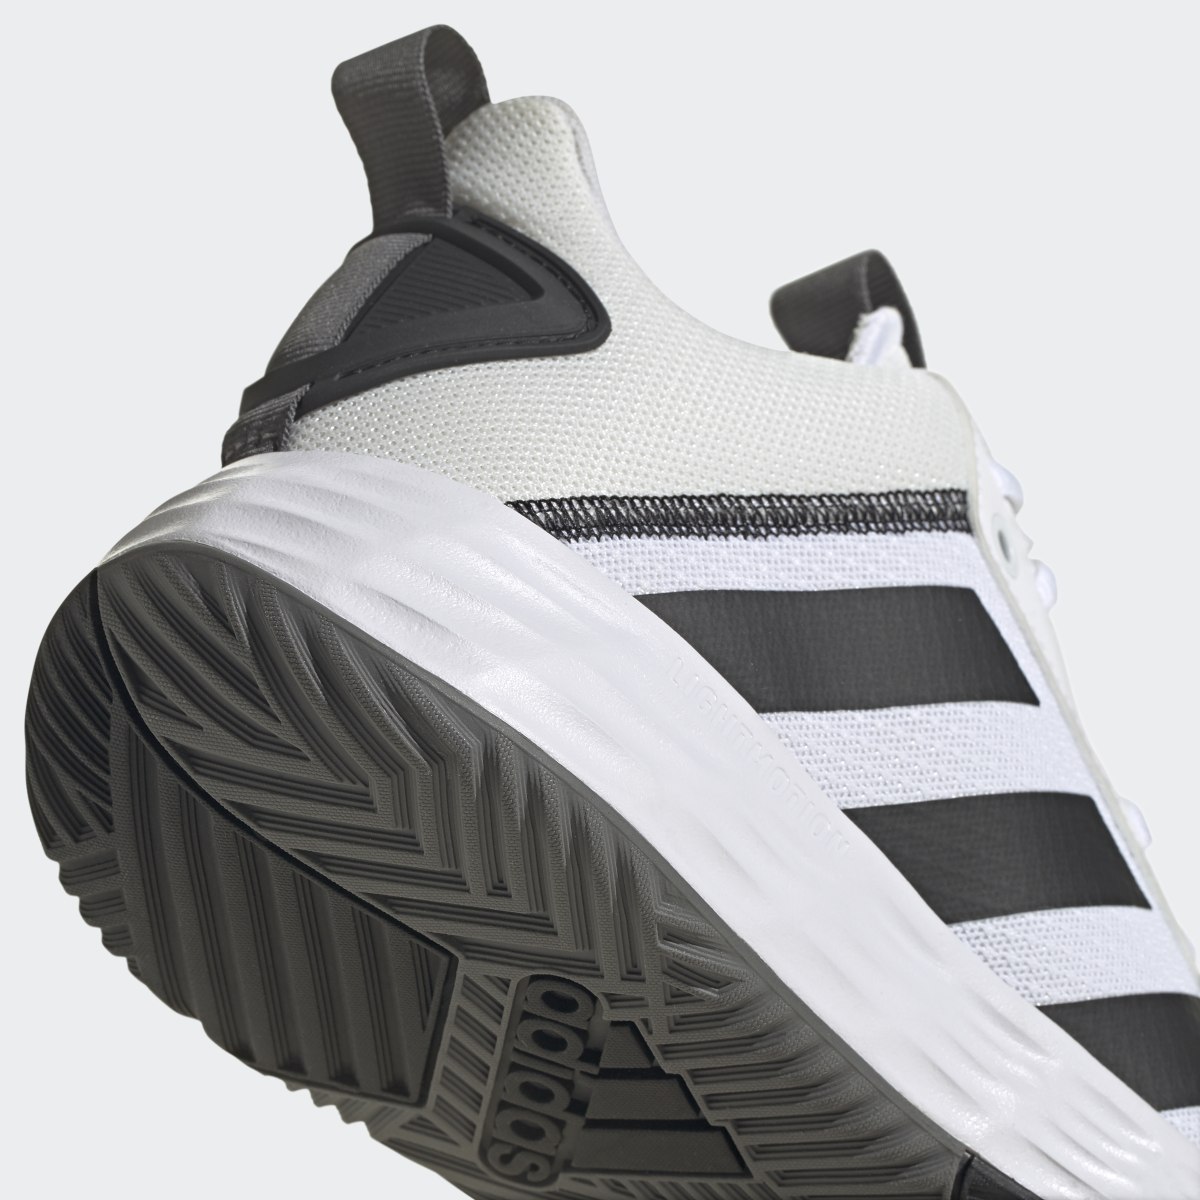 Adidas Ownthegame Shoes. 10